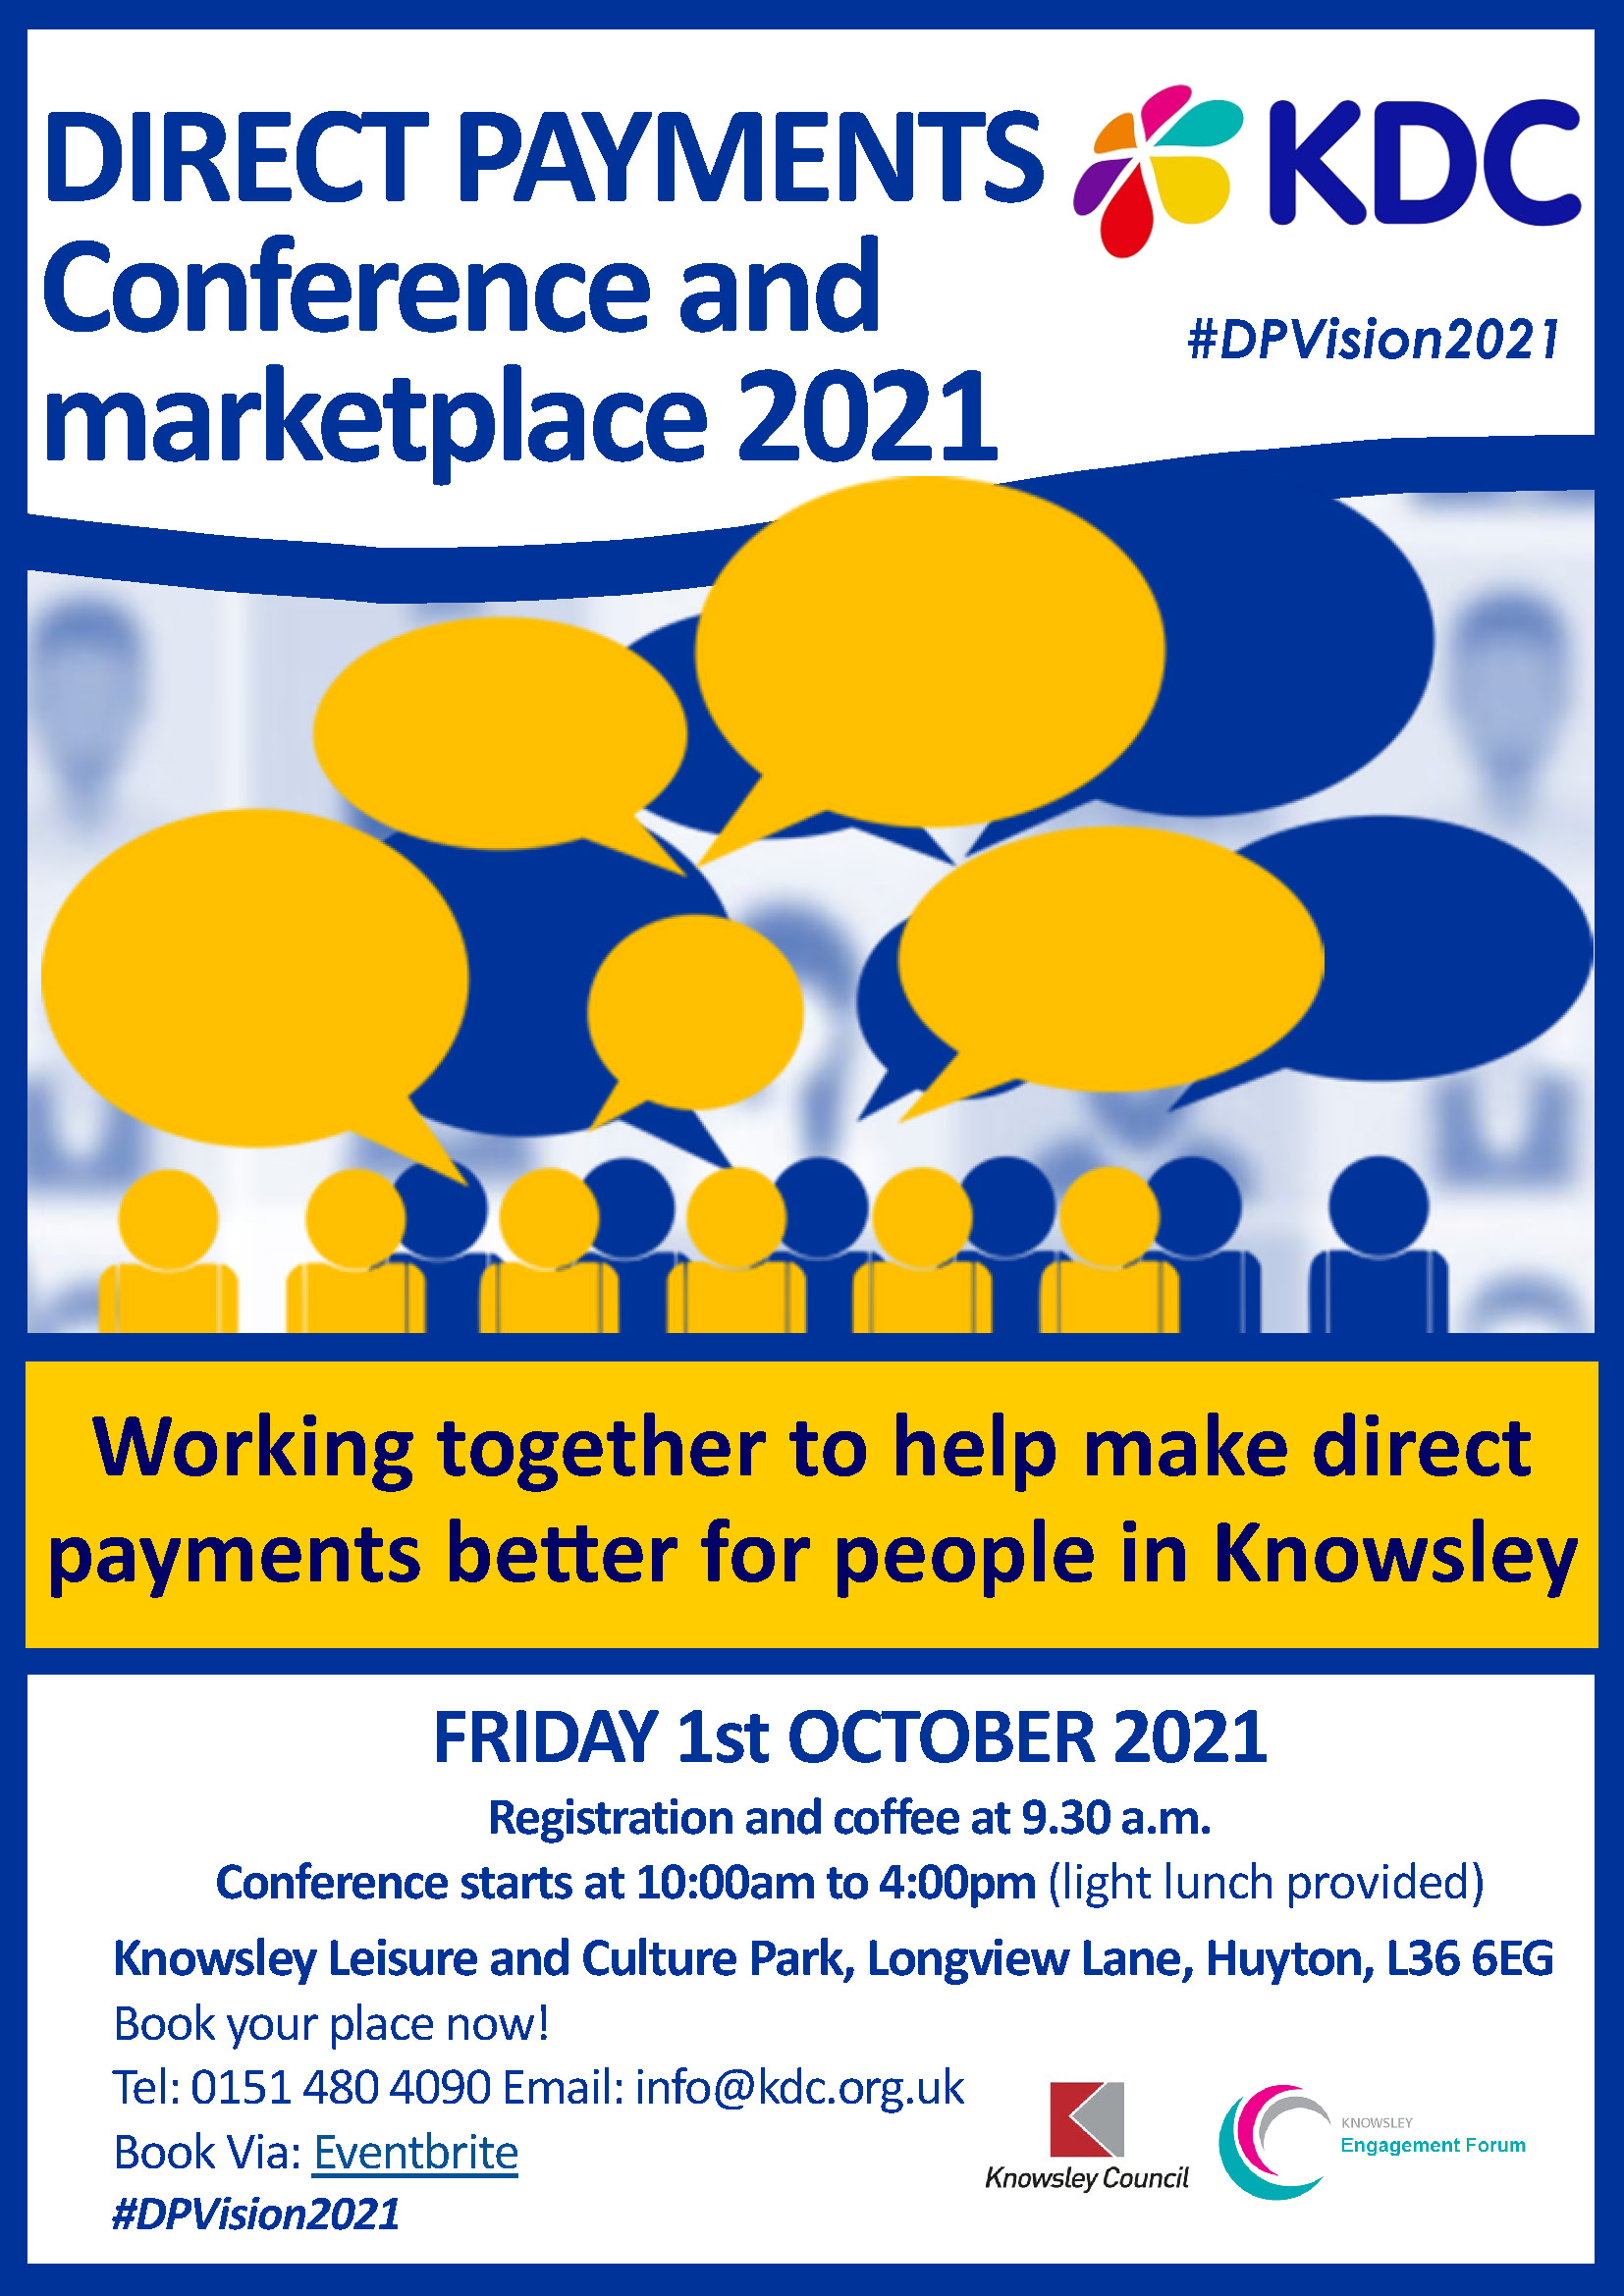 Direct Payments Conference and Market Place 2021 KDC